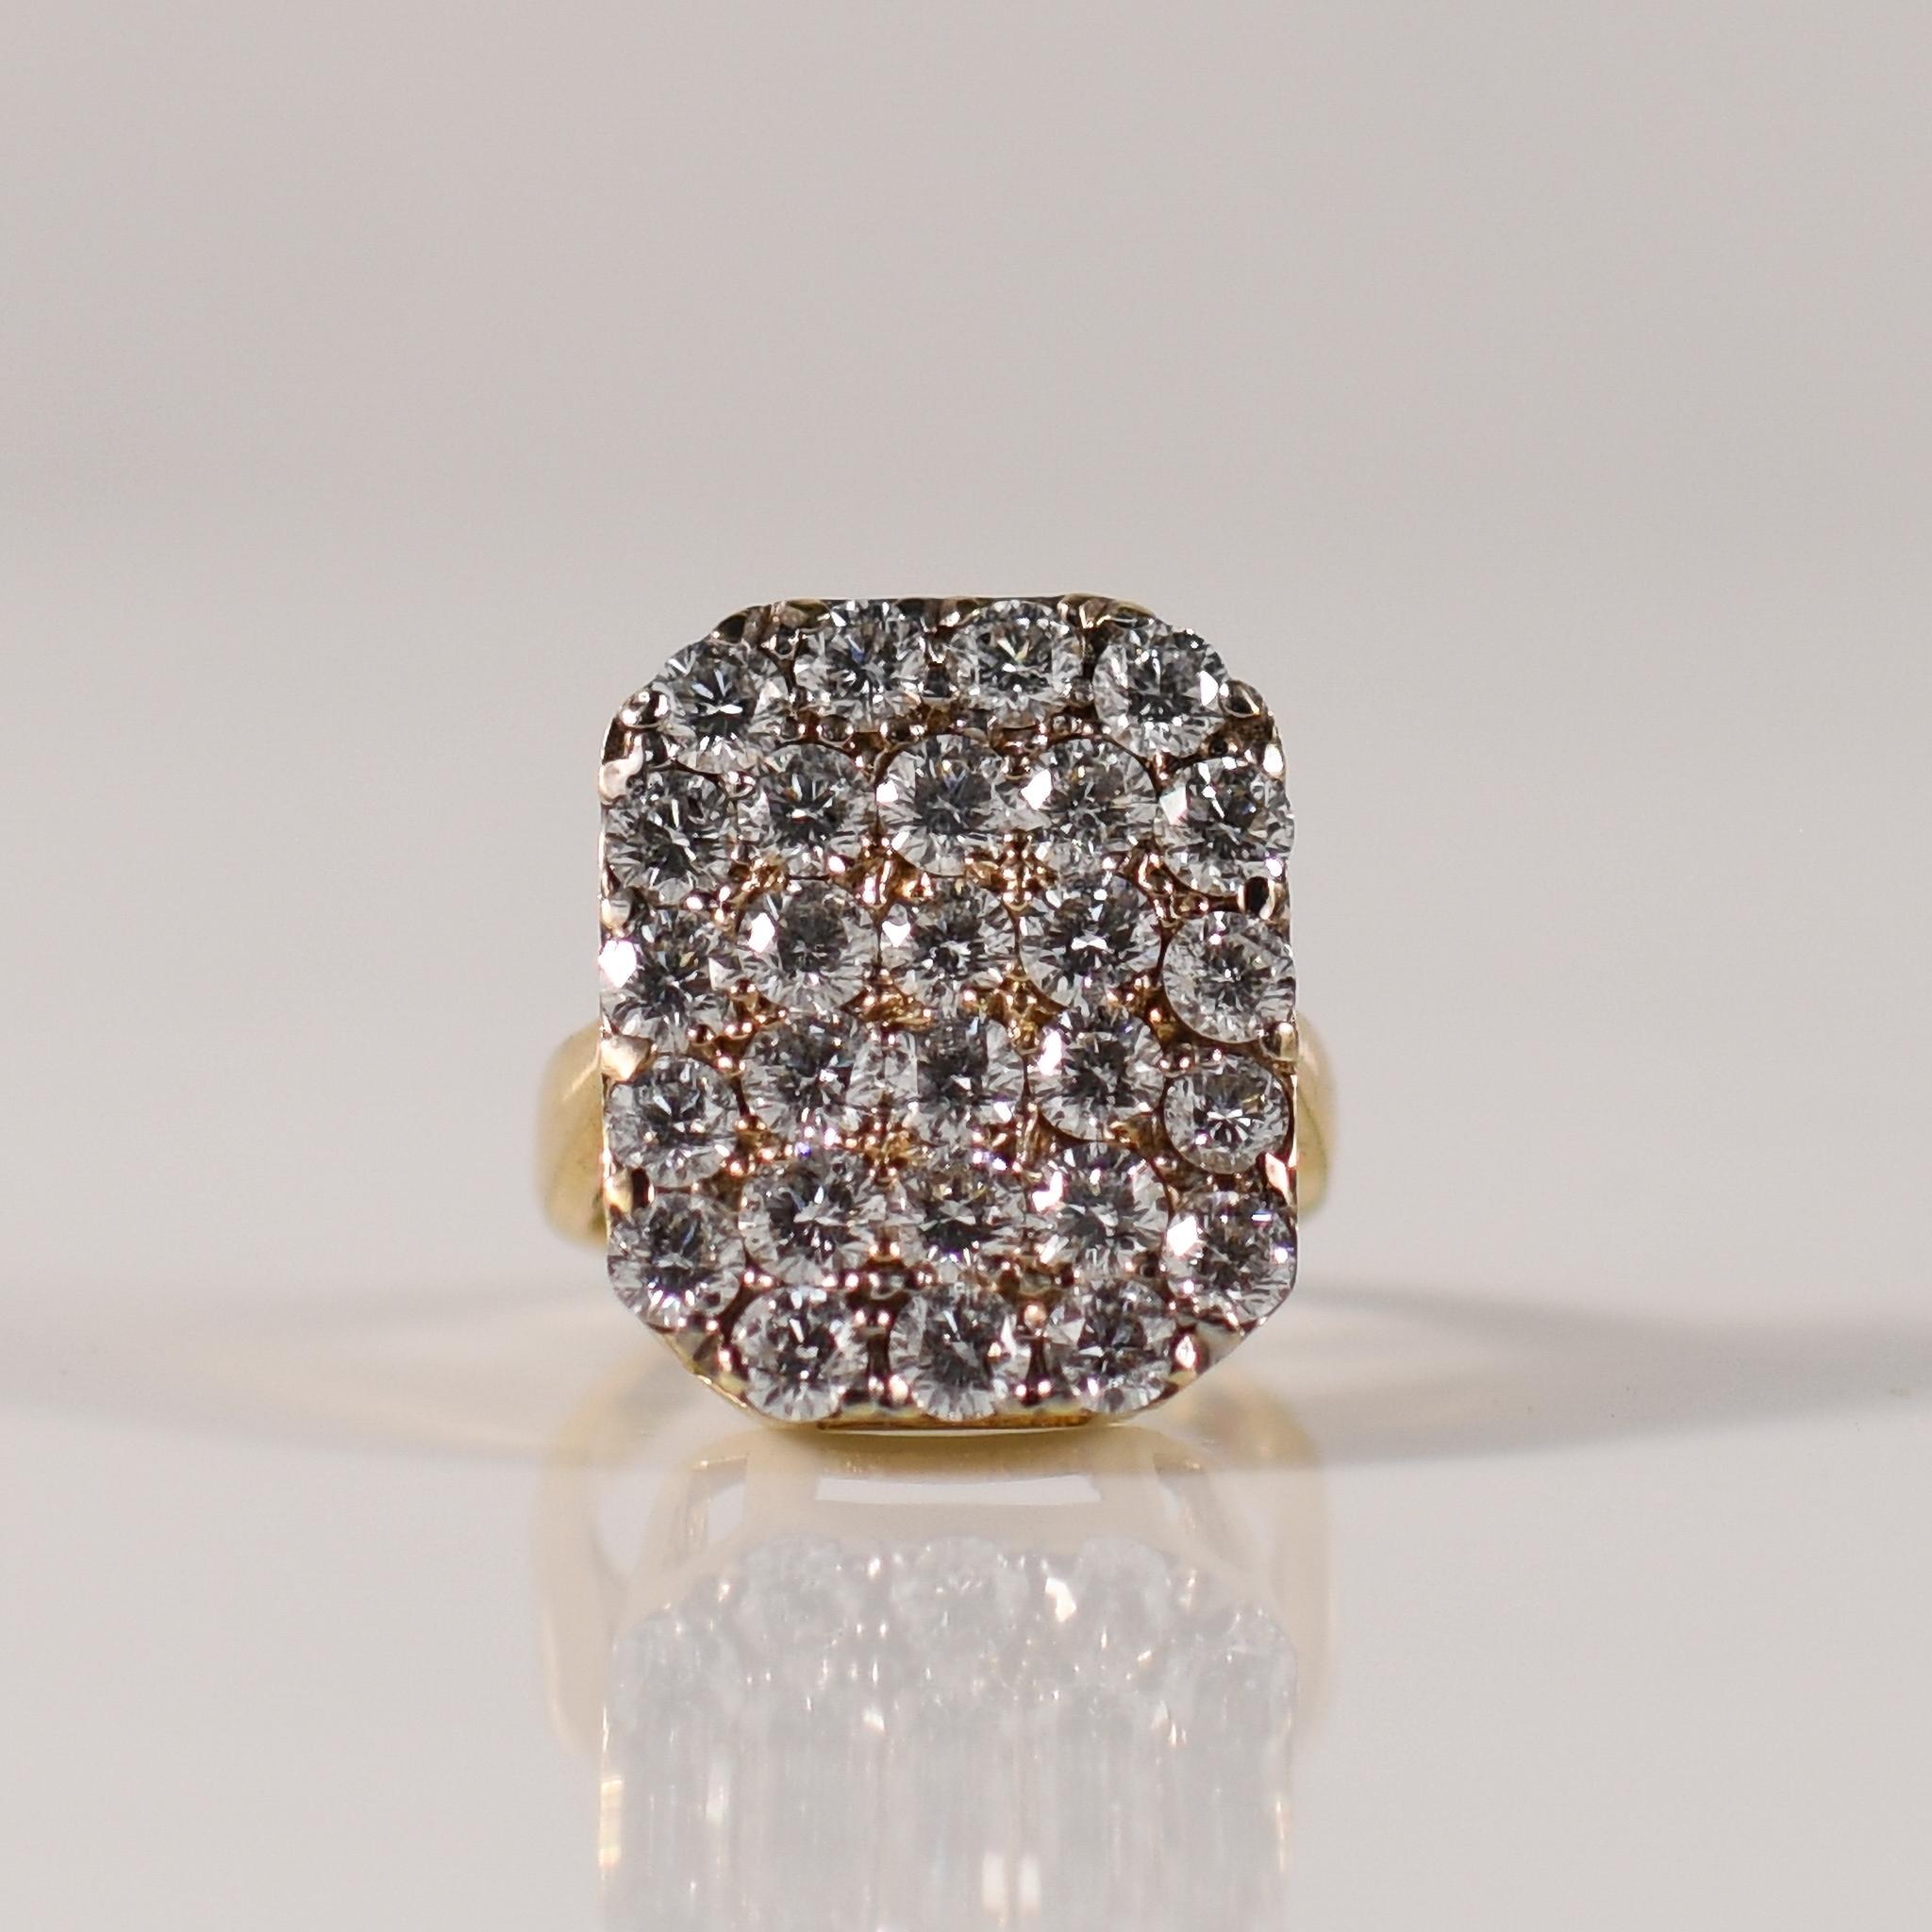 Step into the allure of bygone eras with this vintage-inspired pave diamond ring, boasting a total of 4.25 carats of shimmering brilliance. The diamonds, expertly set in a pave style, create a seamless blanket of sparkle, evoking the glamour of